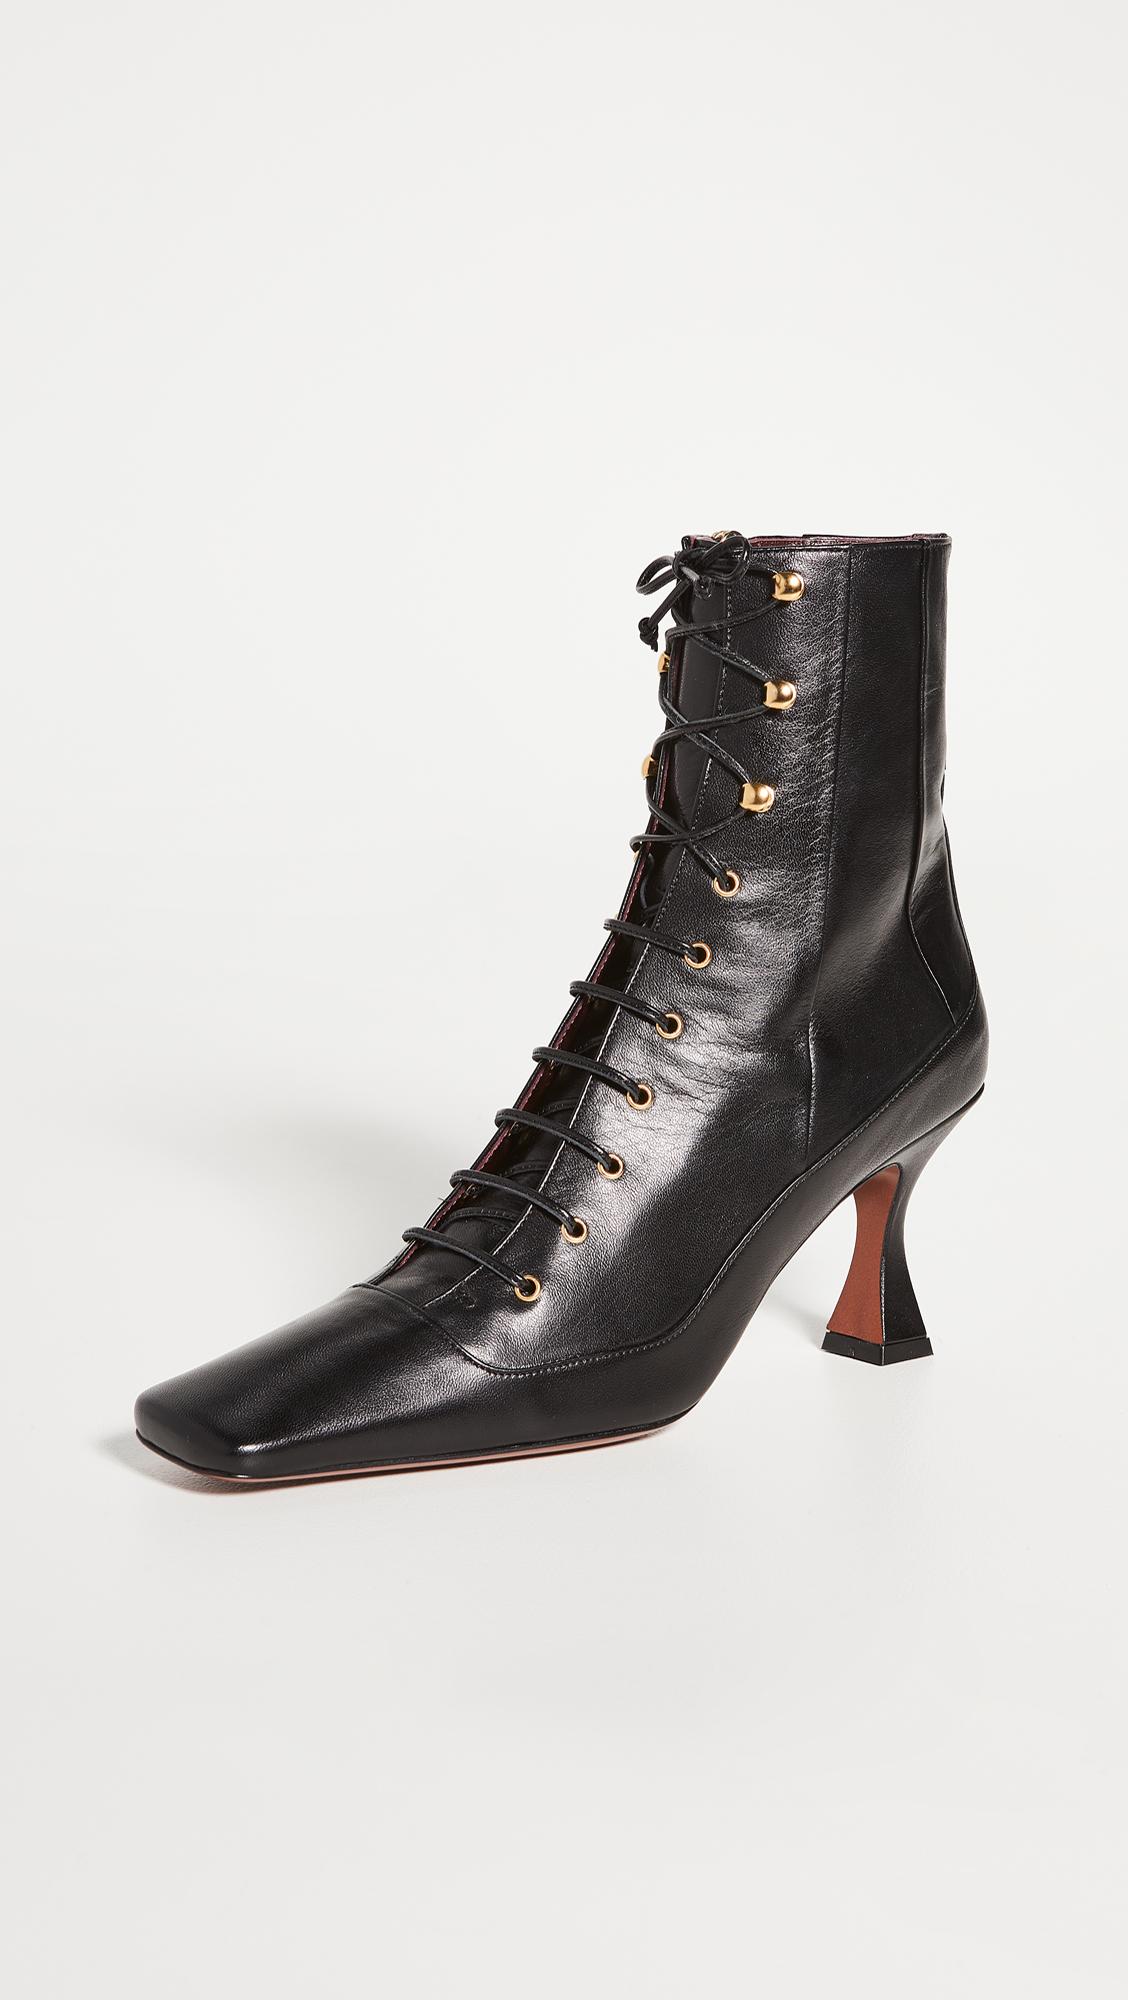 MANU Atelier Lace Up Duck Boots in Black | Lyst